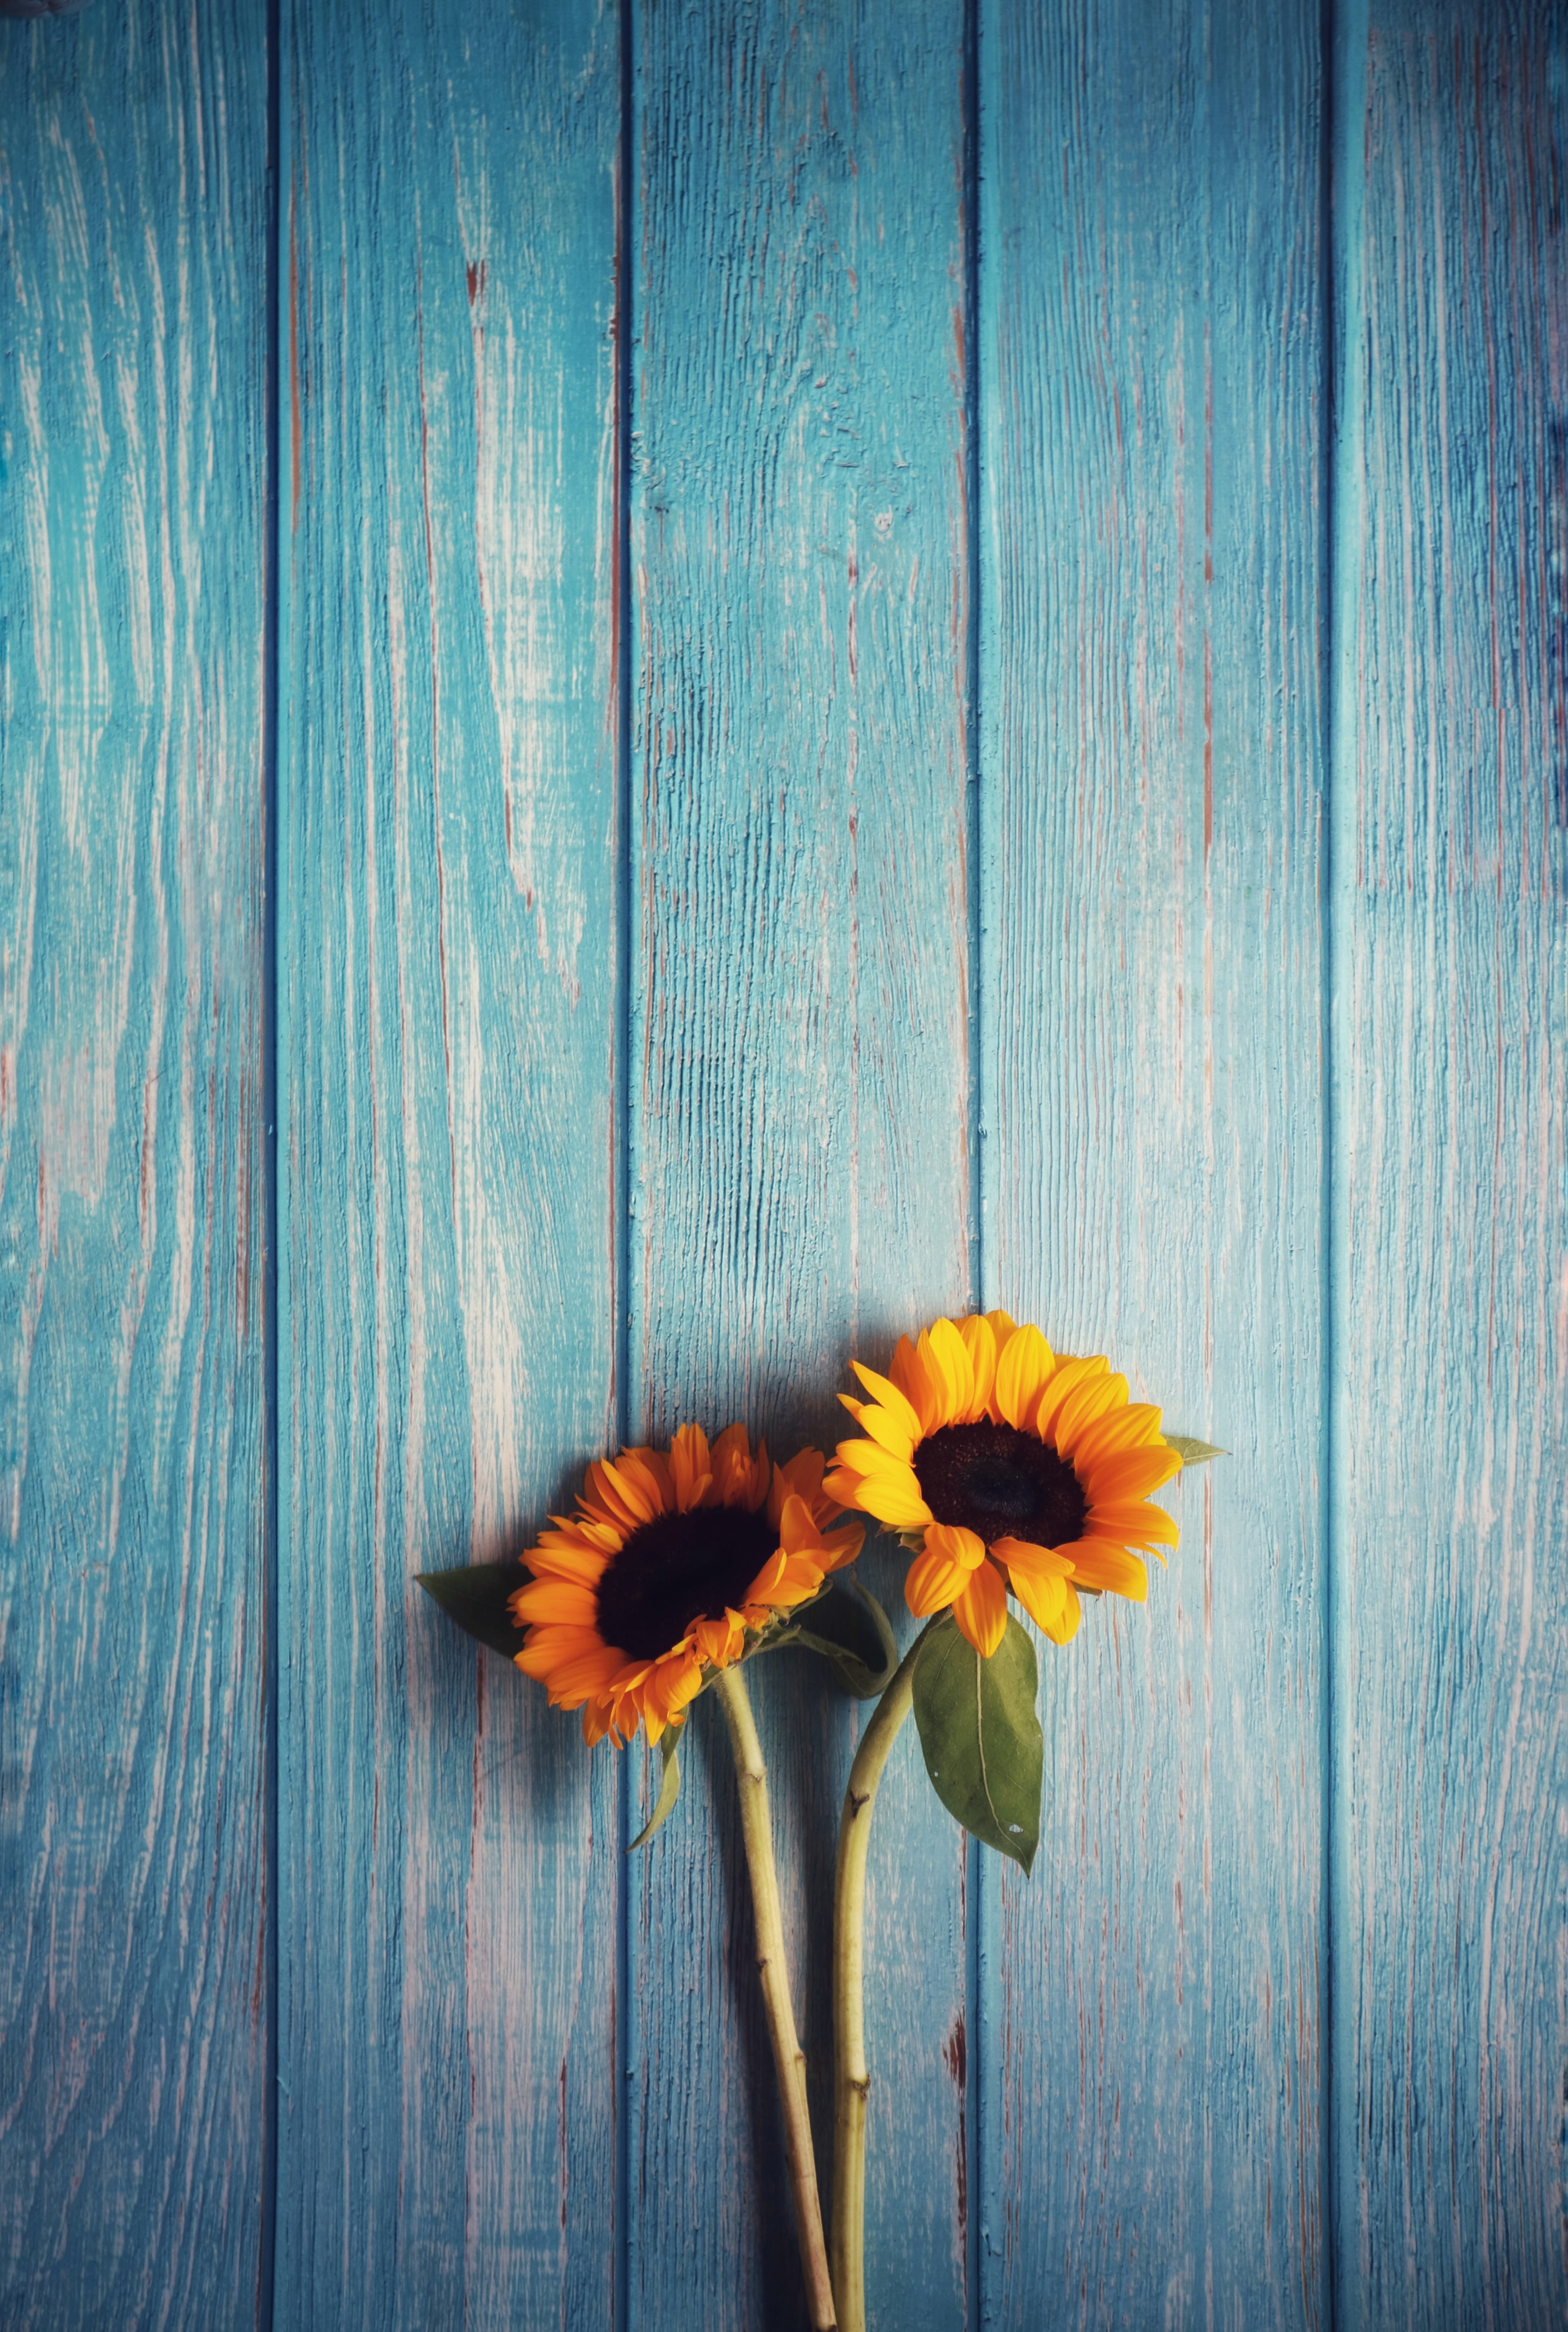 sunflowers, texture, flowers, wood, wooden